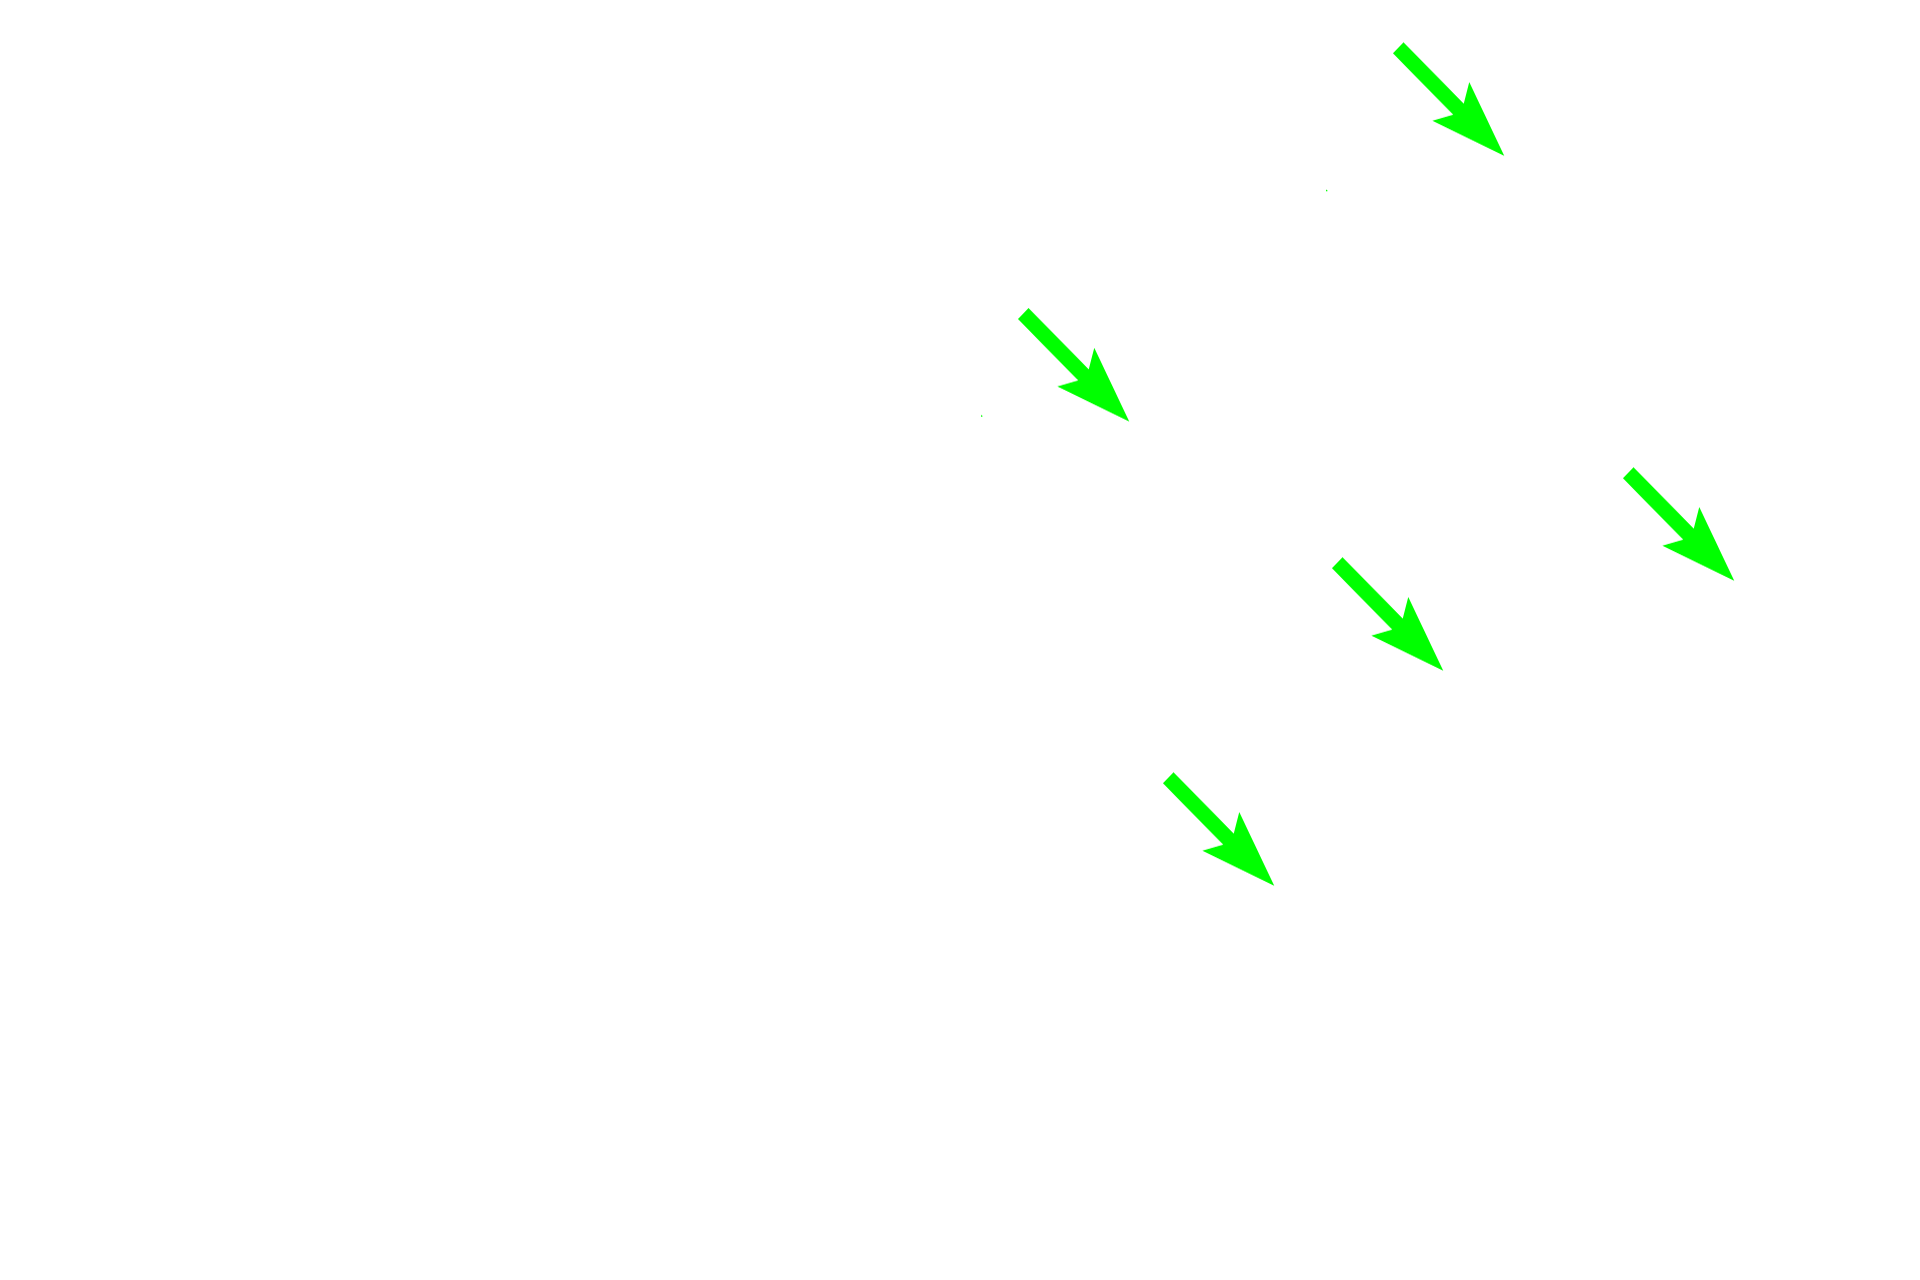  - Lumens <p>Tubules, as the name indicates, are linear secretory units lined by cuboidal to columnar cells.  A number of tubules in longitudinal and cross section are visible in the image.  Most tubules secrete mucus and the apical region appears frothy or clear because the mucus is easily extracted during tissue processing.  The nuclei are basally located and compressed by the mass of mucus above them.  Tubules have a wide lumen to accommodate the thick, mucus secretion.</p>
